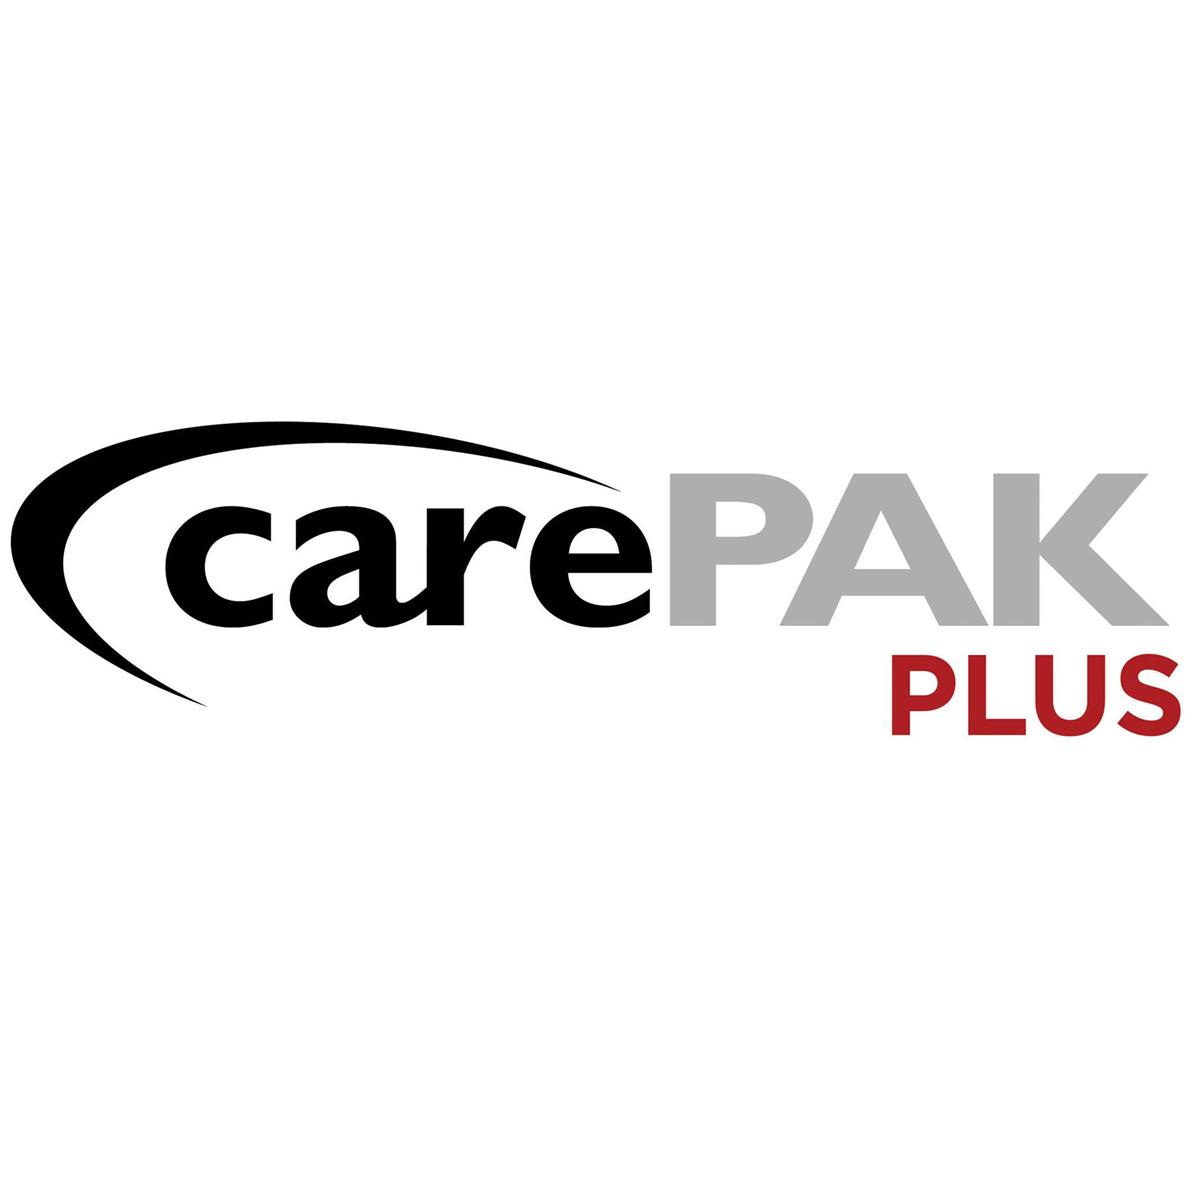 

Canon CarePAK PLUS 4 Year Protection Plan for Printers (Up to $250)